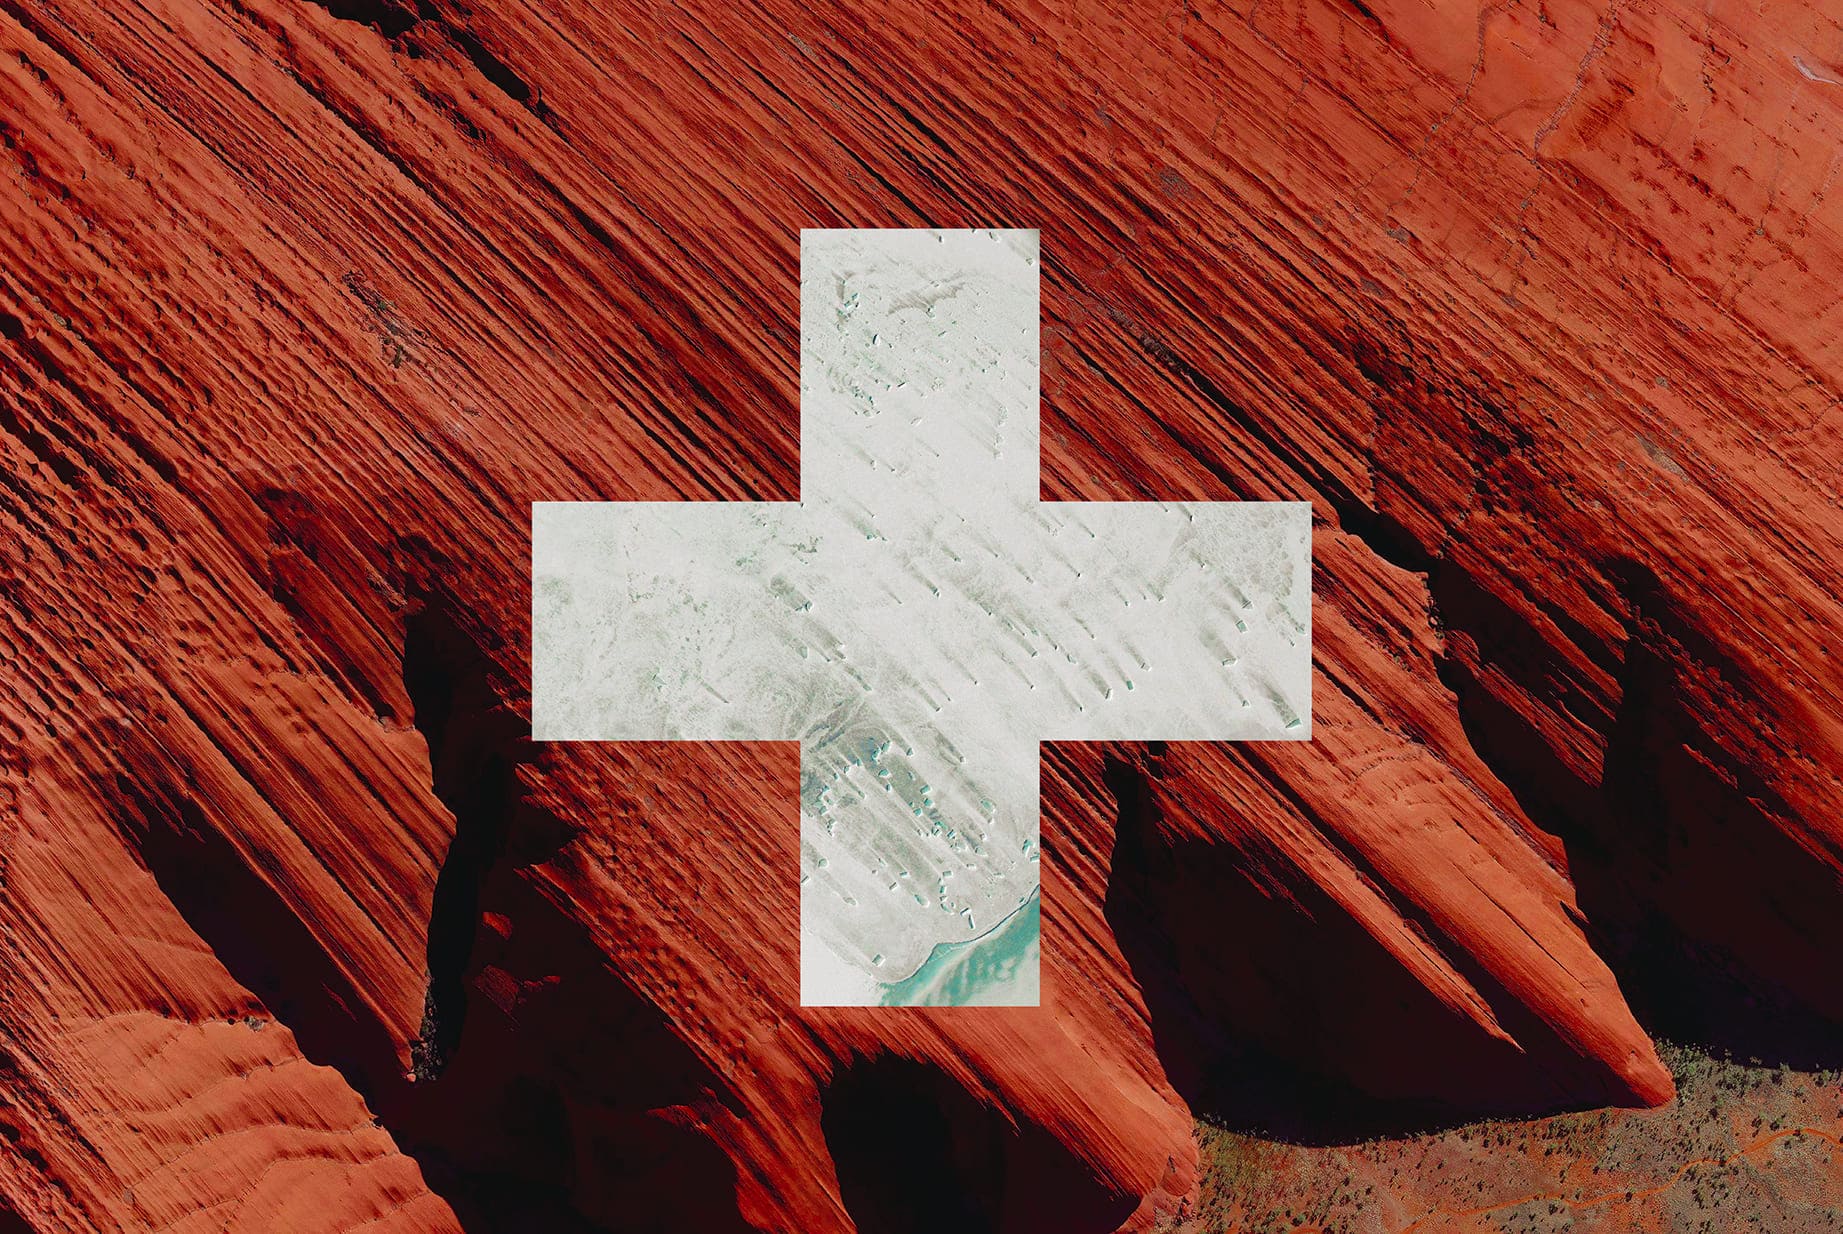 SWISS EARTH FLAG, 2016, DIGITAL COLLAGE OF SATELLITE PHOTOGRAPHY FROM AUSTRALIA, ANTARCTICA, diasec print CM 67×100, edition of 9